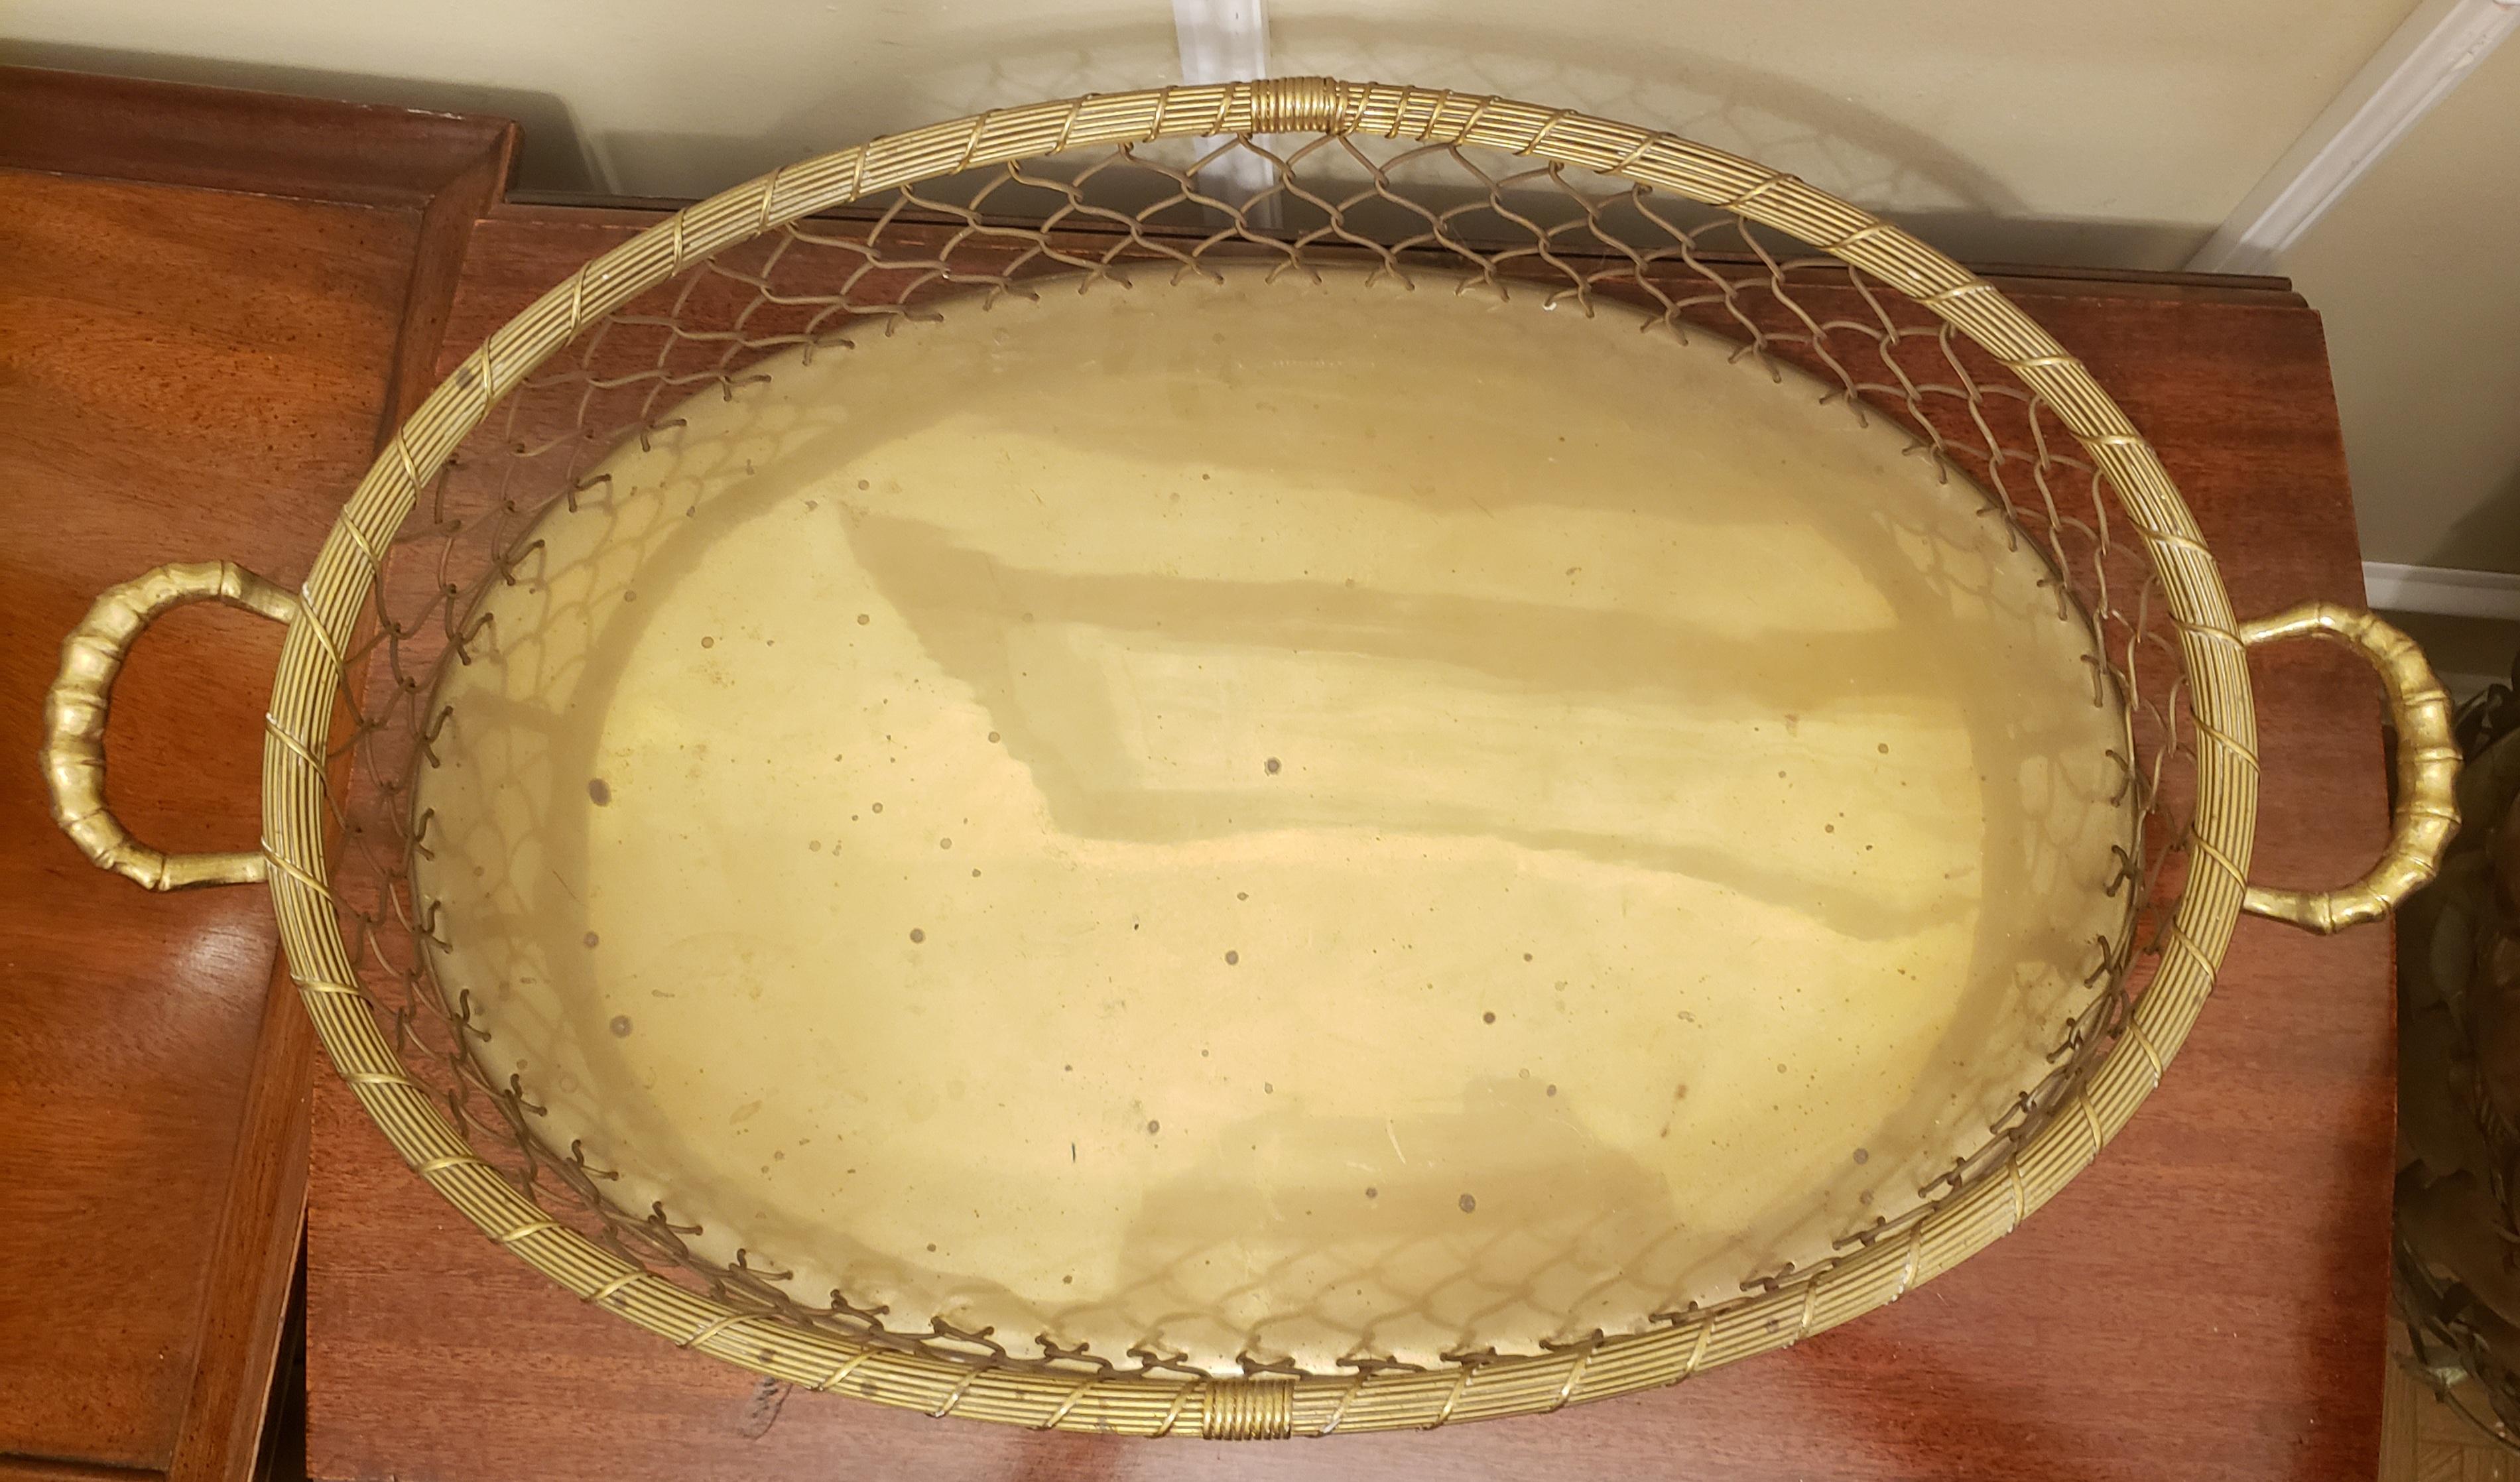 Hollywood Regency serving polished brass oval tray.
A vintage large oval serving brass tray in wire mesh.
Age appropriate patina.
No stamps present from the maker, but originated from India in the 50s.
Dimensions:
4